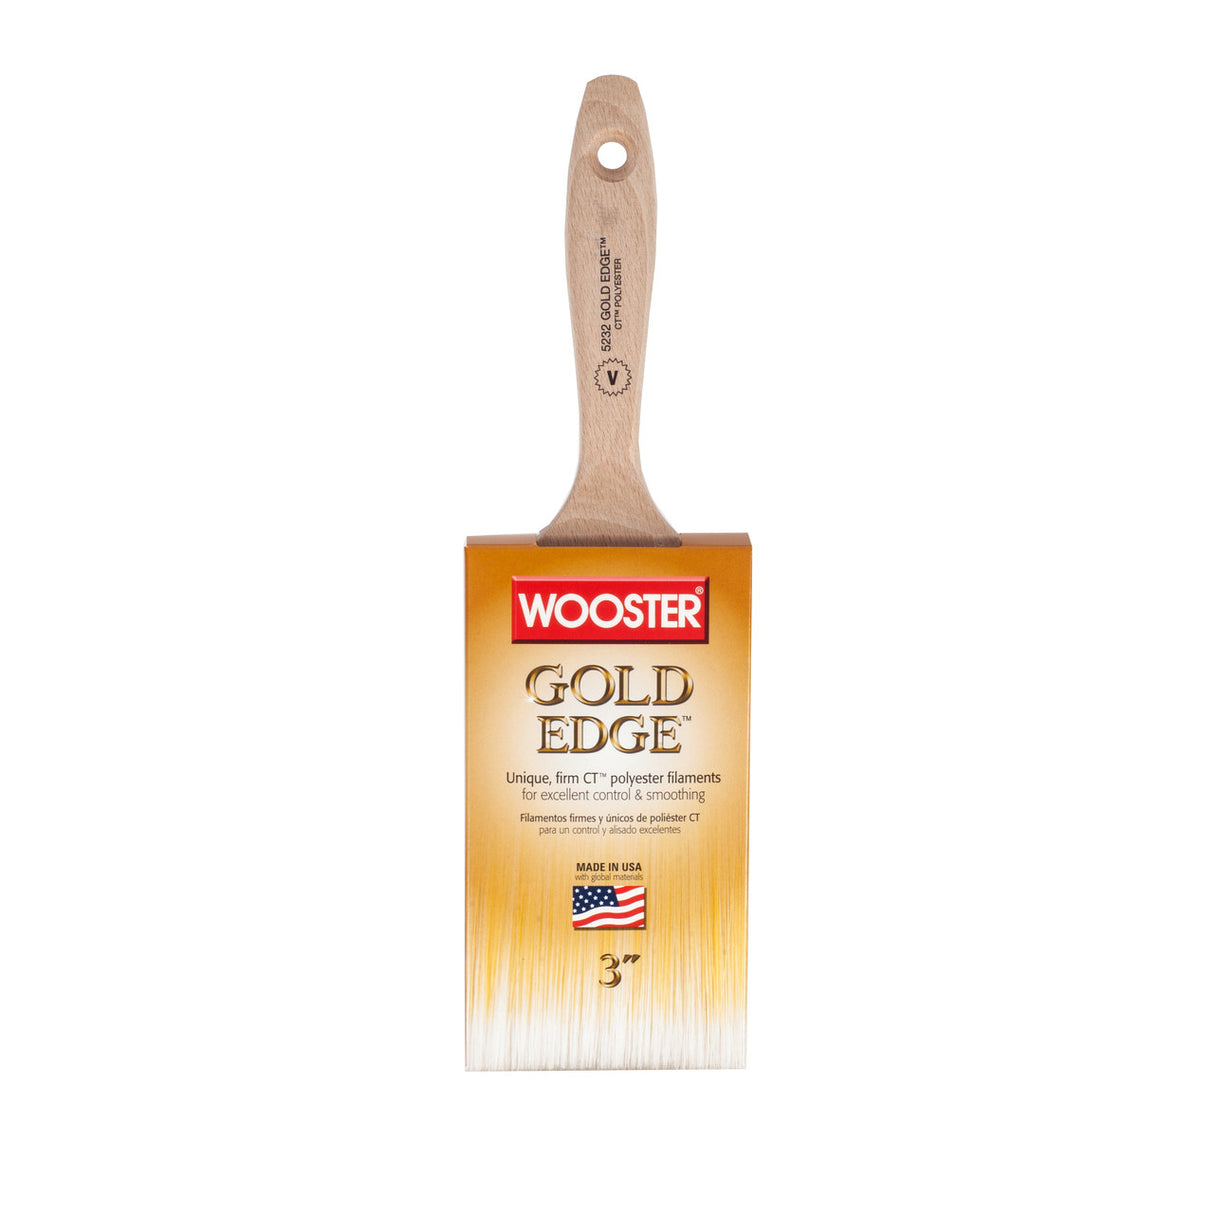 Wooster Gold Edge Paint Brushes